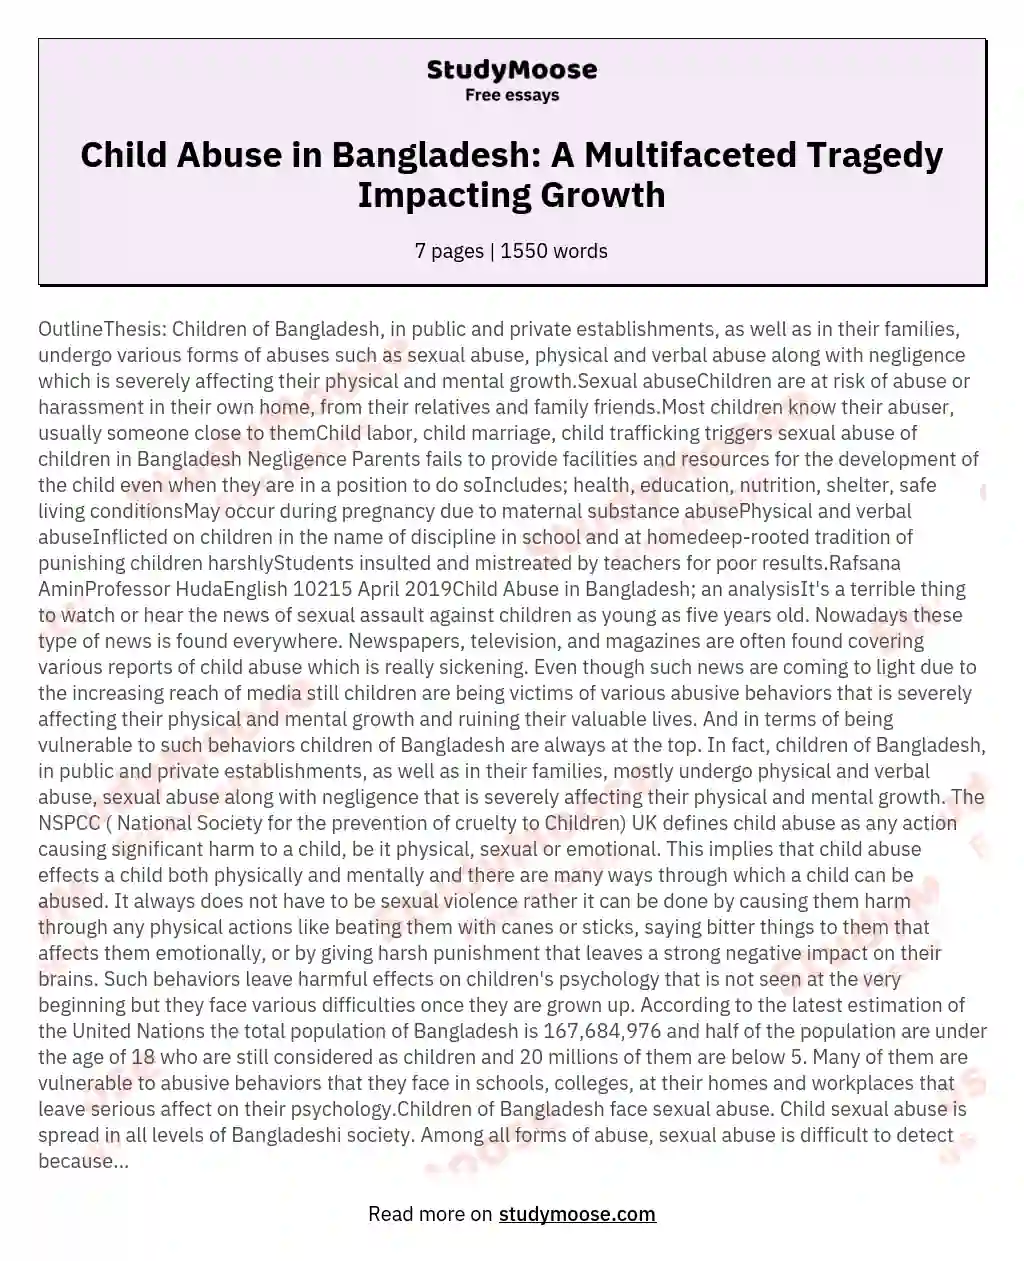 Child Abuse in Bangladesh: A Multifaceted Tragedy Impacting Growth essay